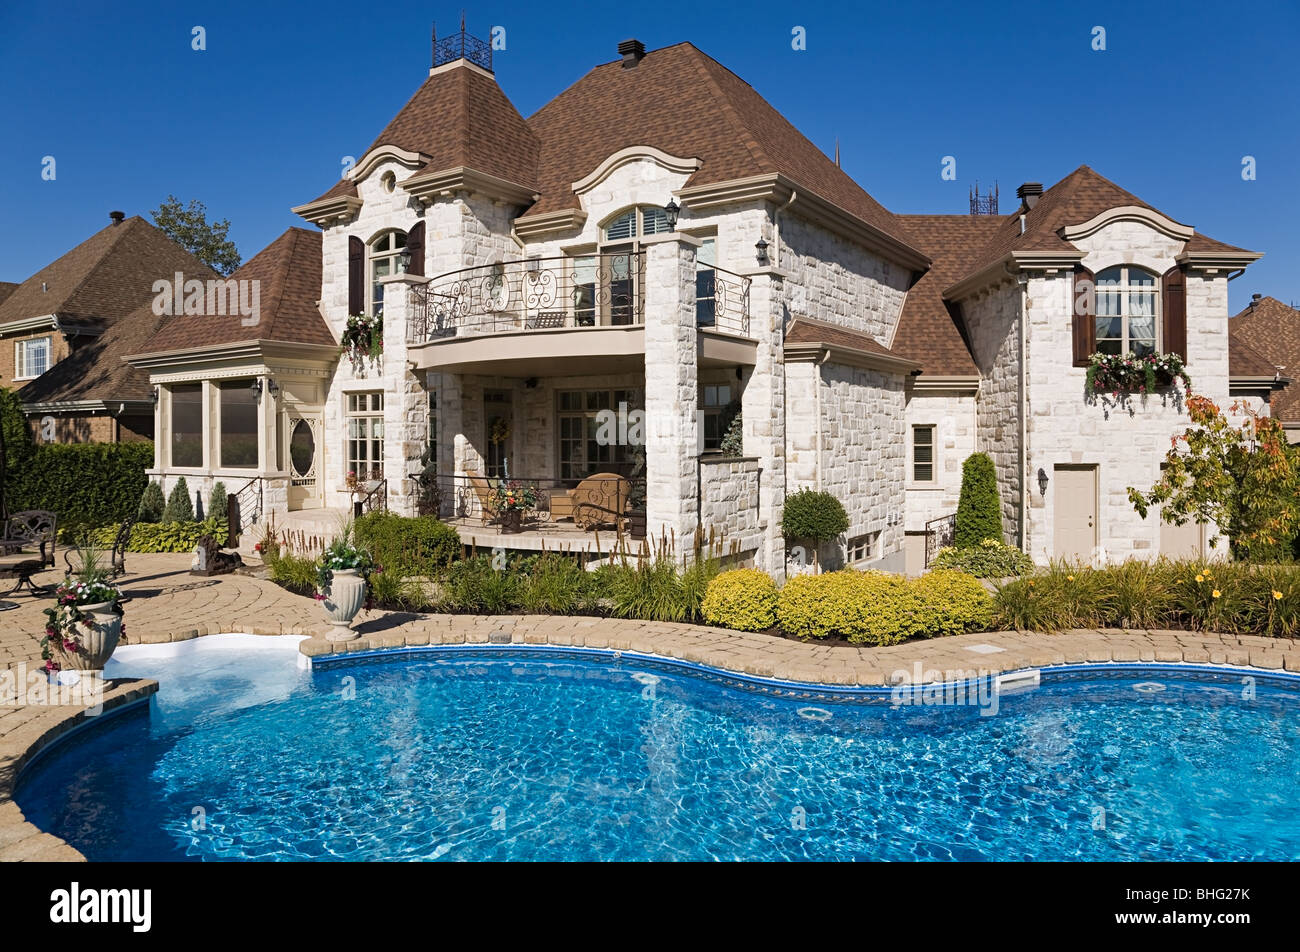 Large house with swimming pool Stock Photo